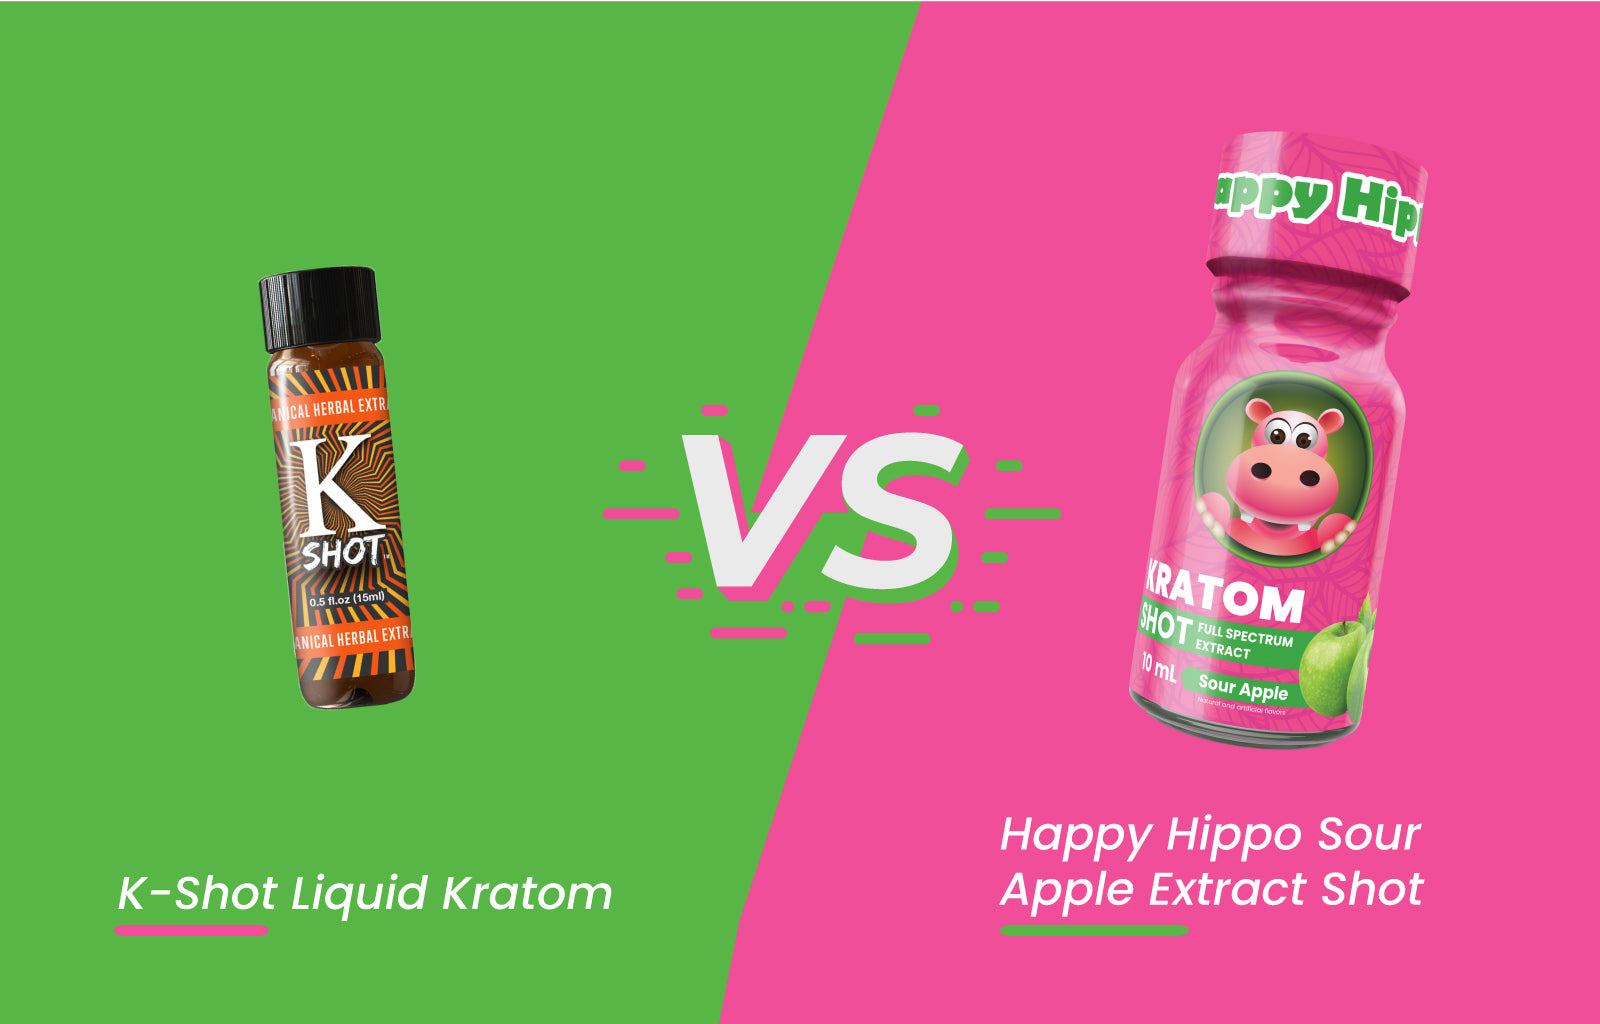 Featured image depicting the Pop Kratom brand K Shot Liquid Kratom Energy Shot Versus the Happy Hippo Brand Kratom Extract, Kratom Energy Shot; An image of the K Shot sits on the left, and the Sour Apple Kratom Energy Shot on the right.